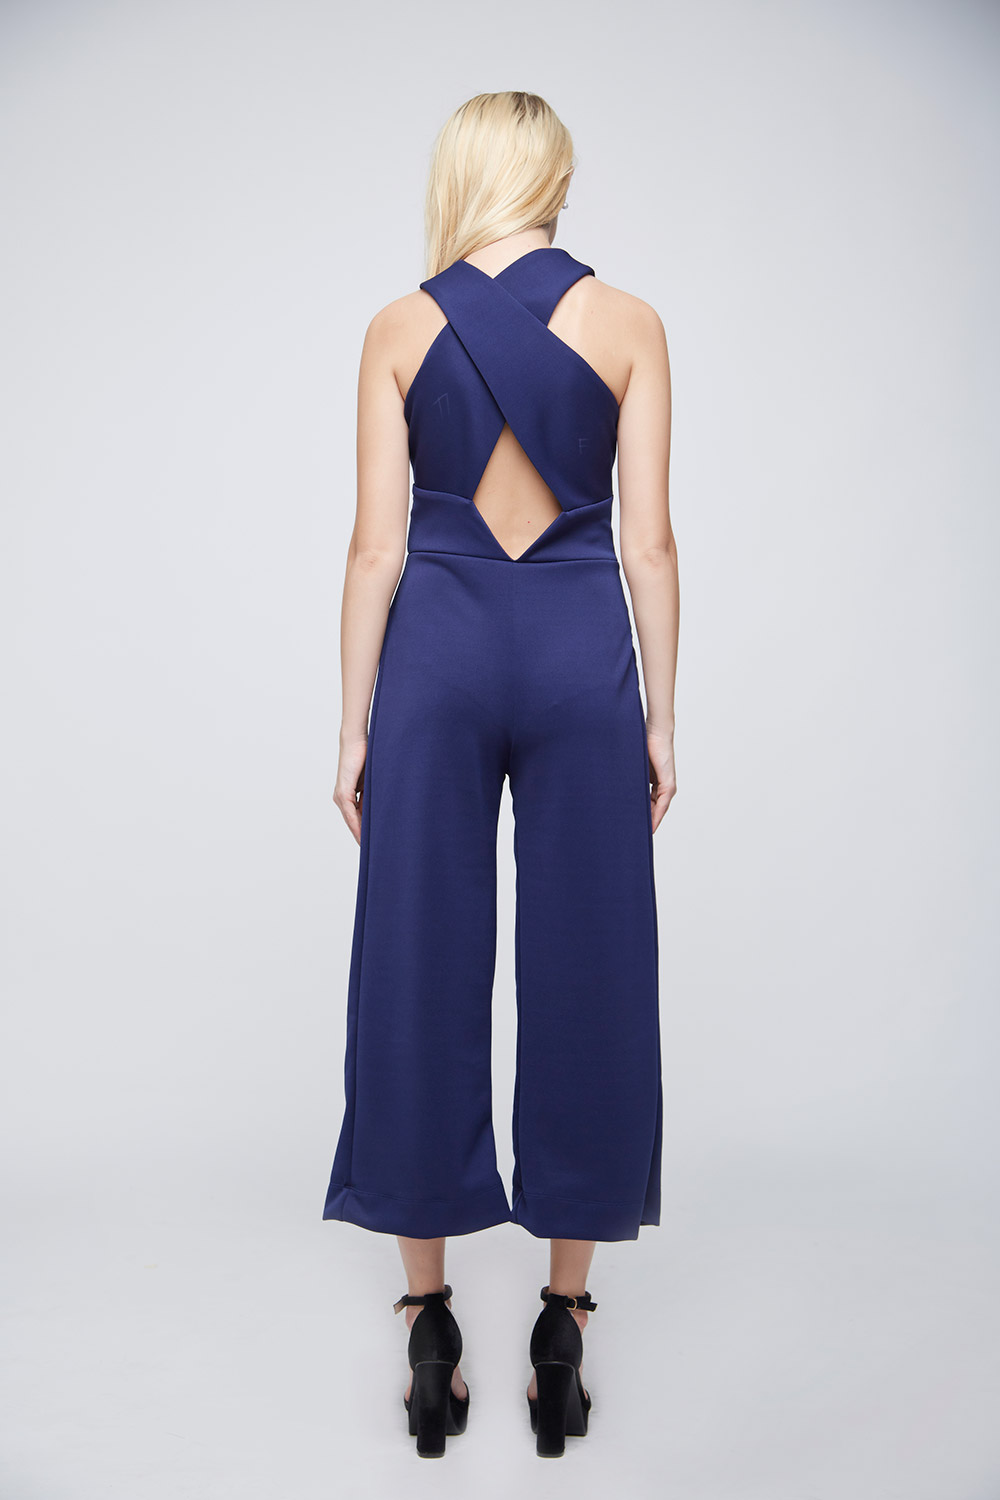 Axis Blue Jumpsuit -2